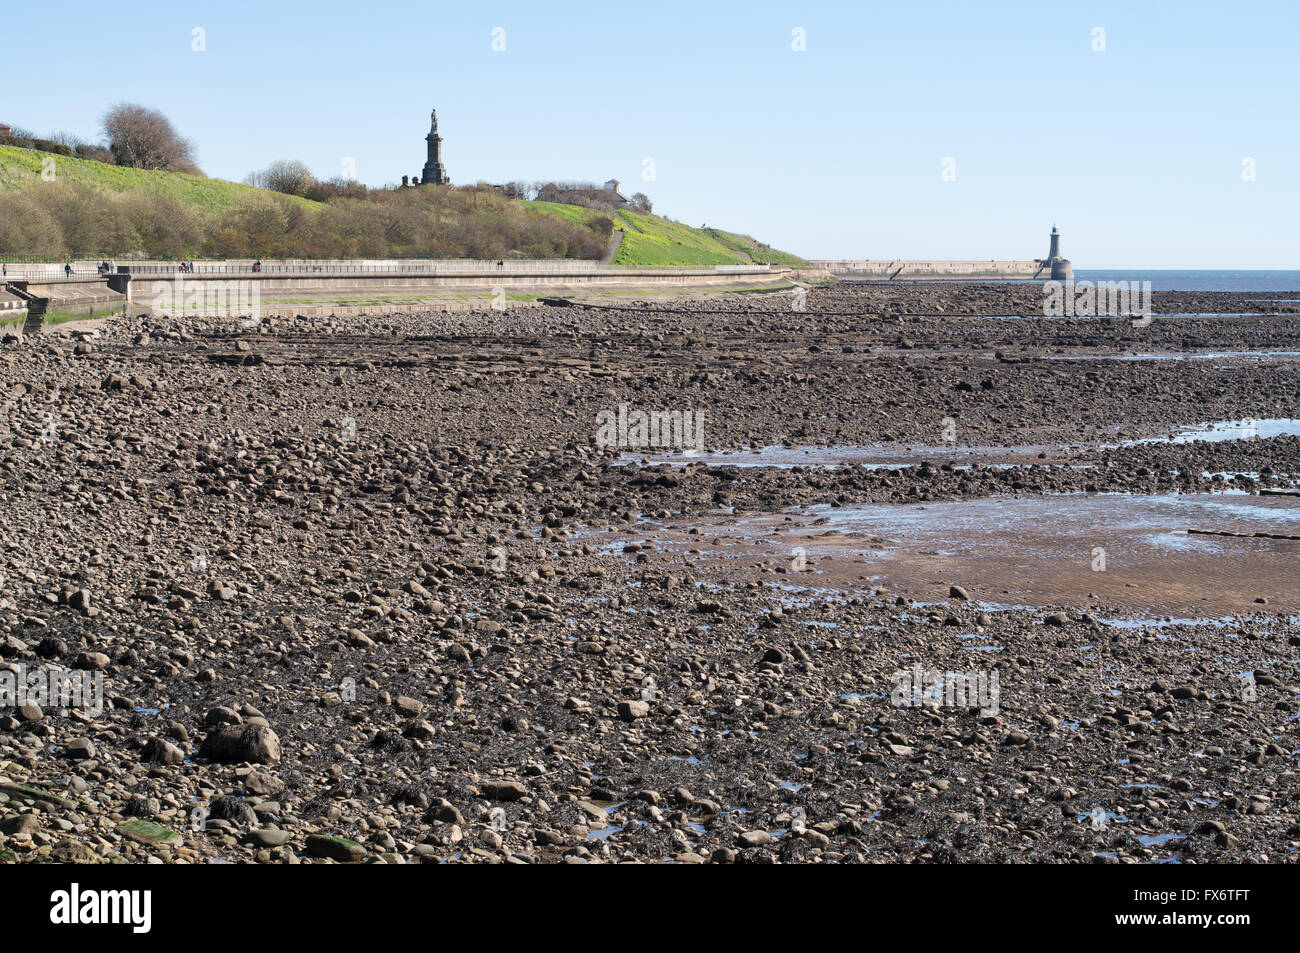 The Black Middens rocks exposed at low tide within the Tyne estuary, Tynemouth, north east England, UK Stock Photo